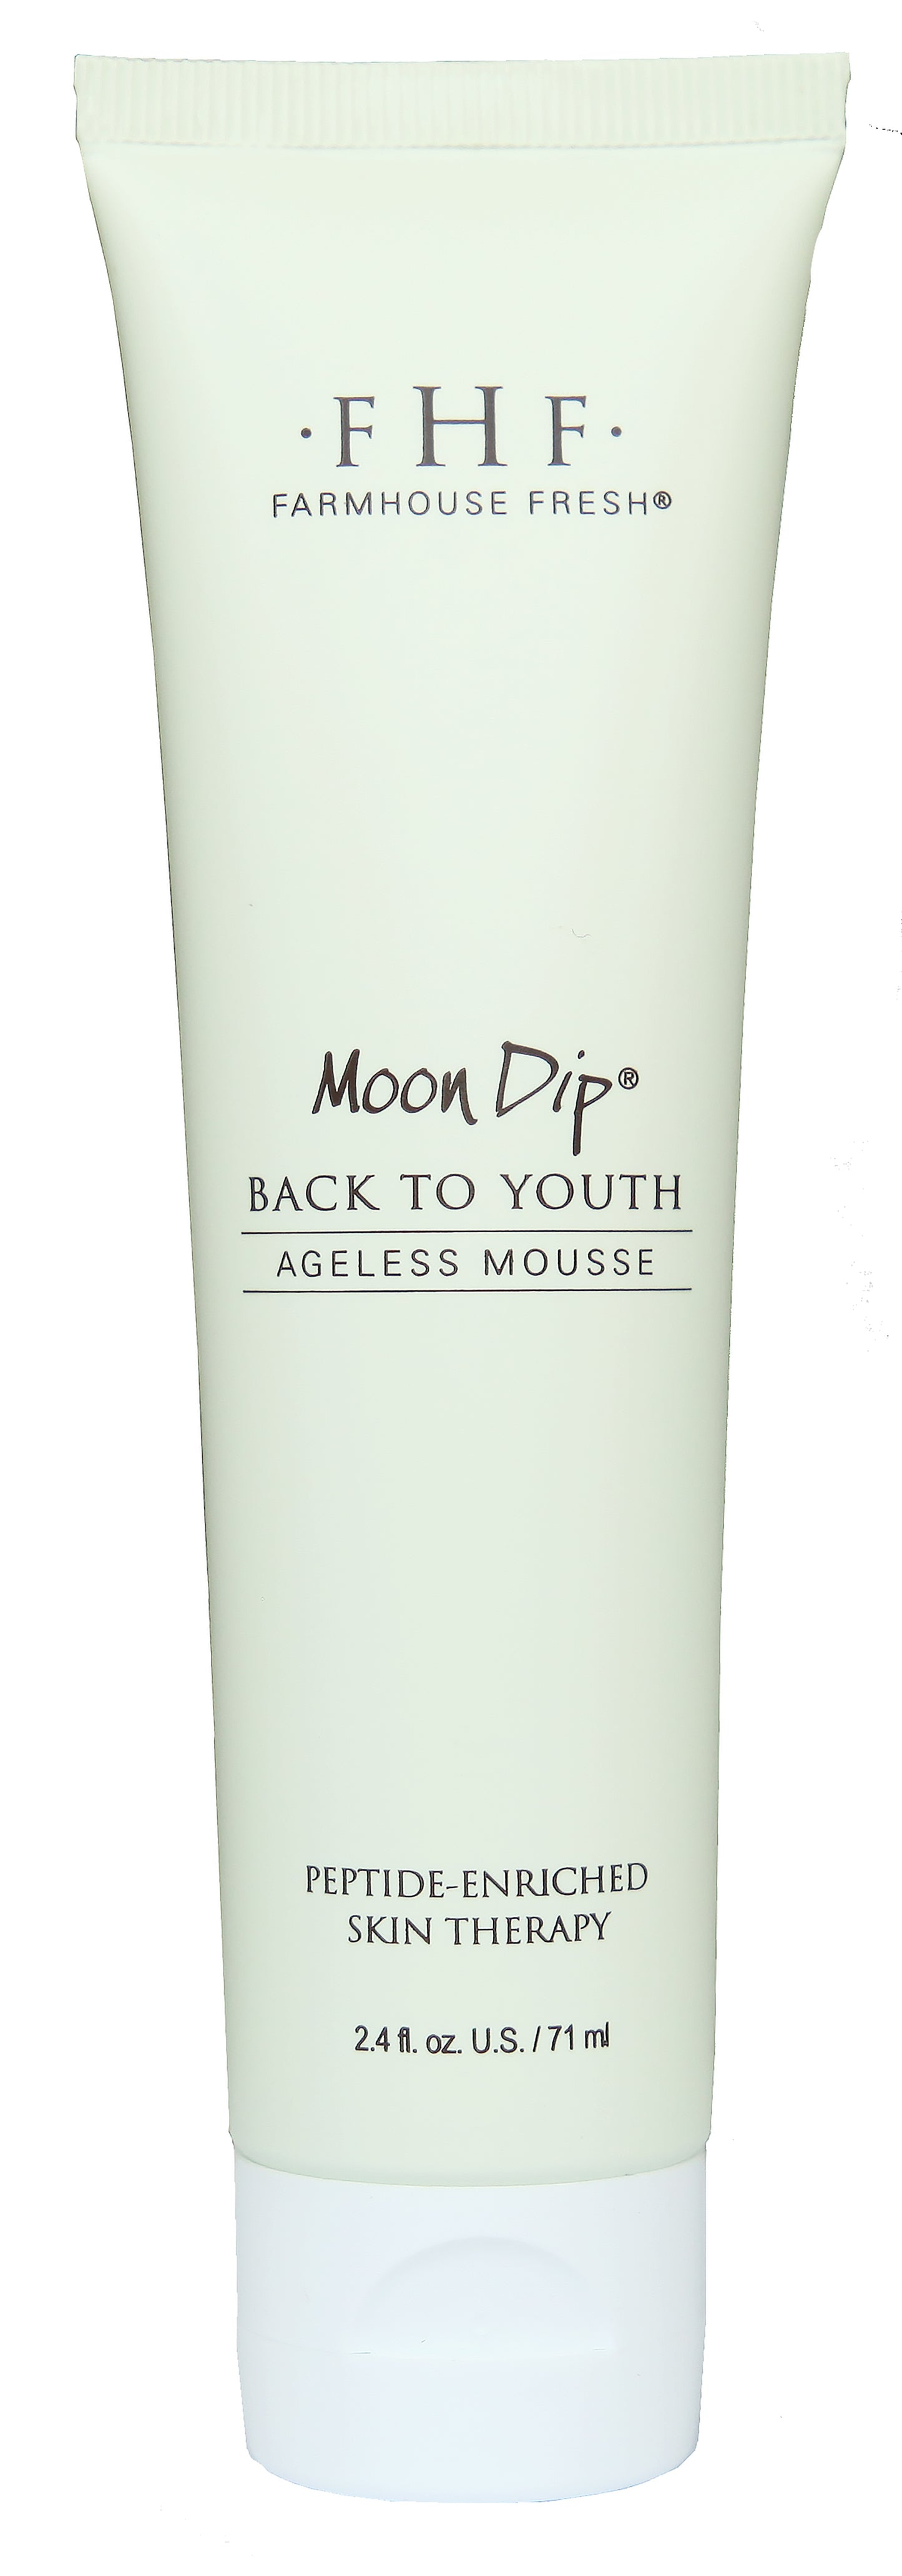 FarmHouse Fresh Moon Dip Back to Youth Ageless Mousse Hand Cream